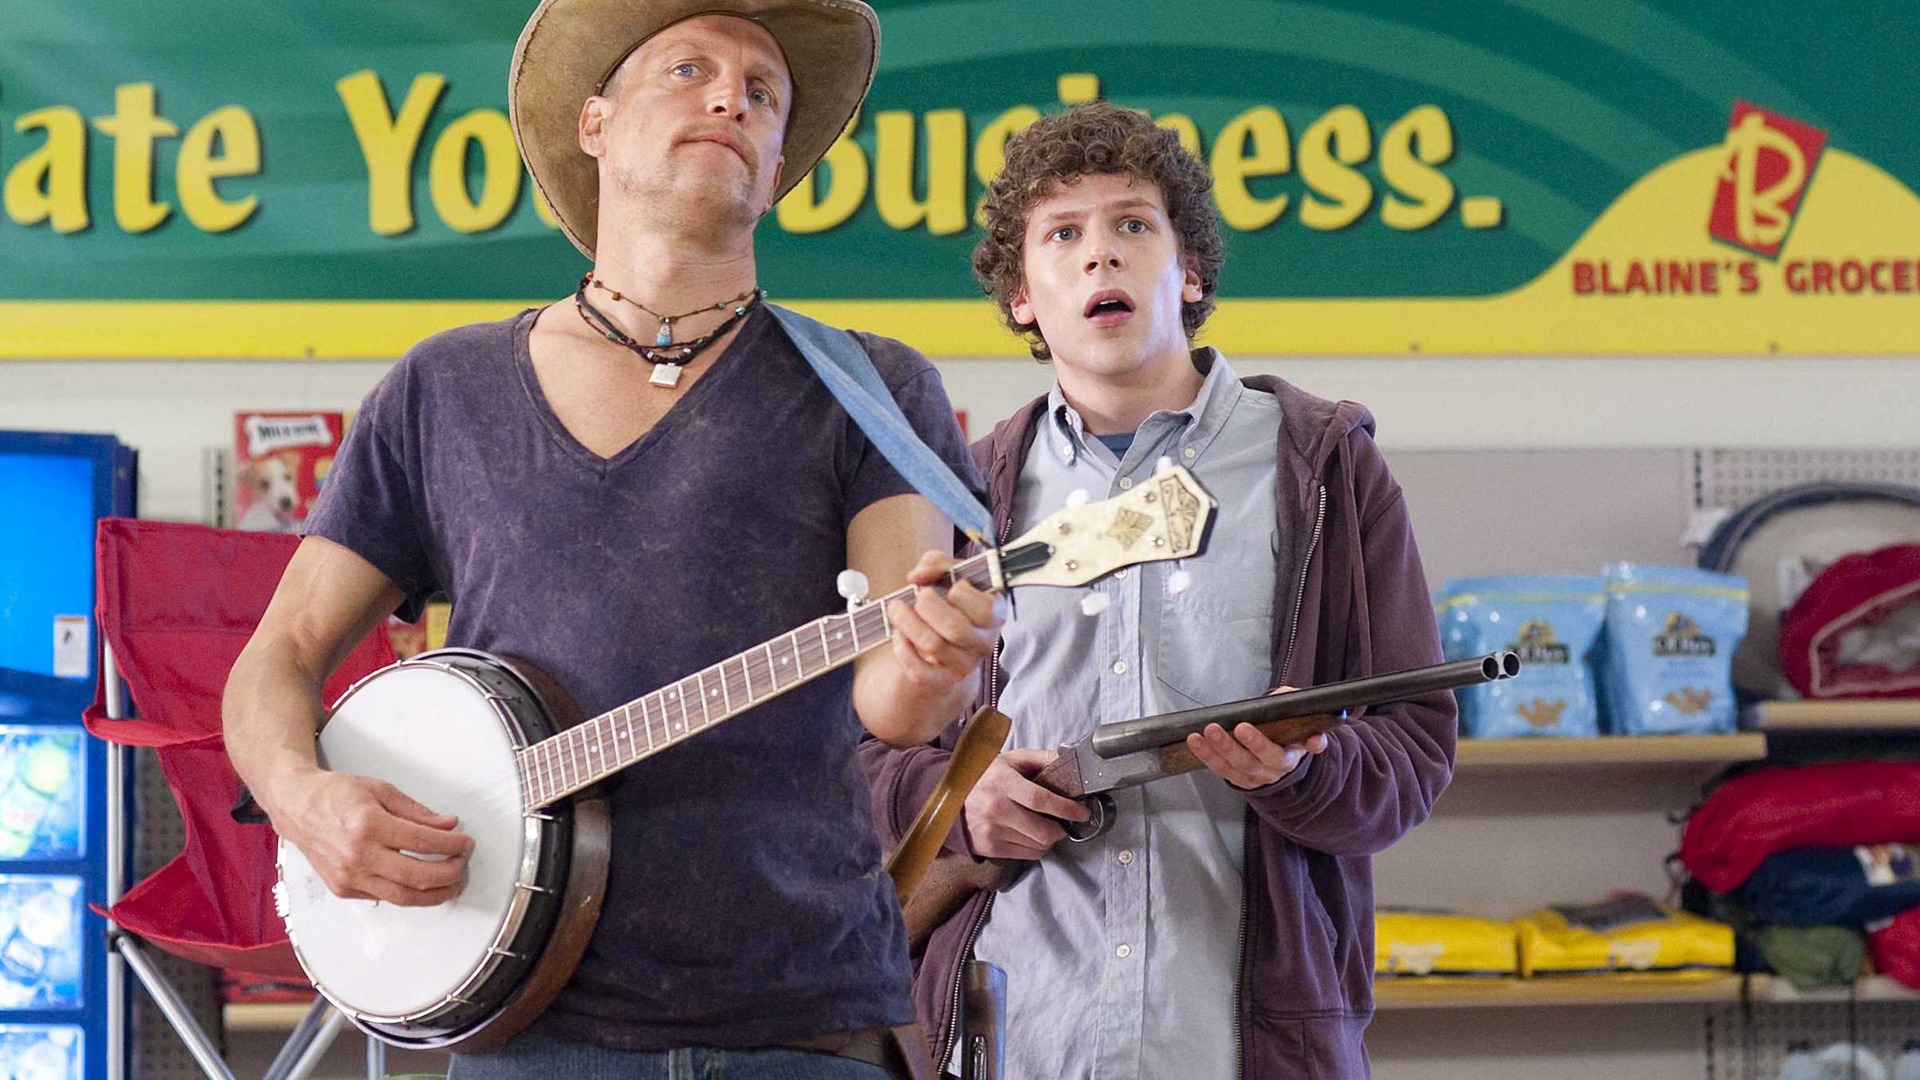 Wallpaper Of Zombieland You Are Ing